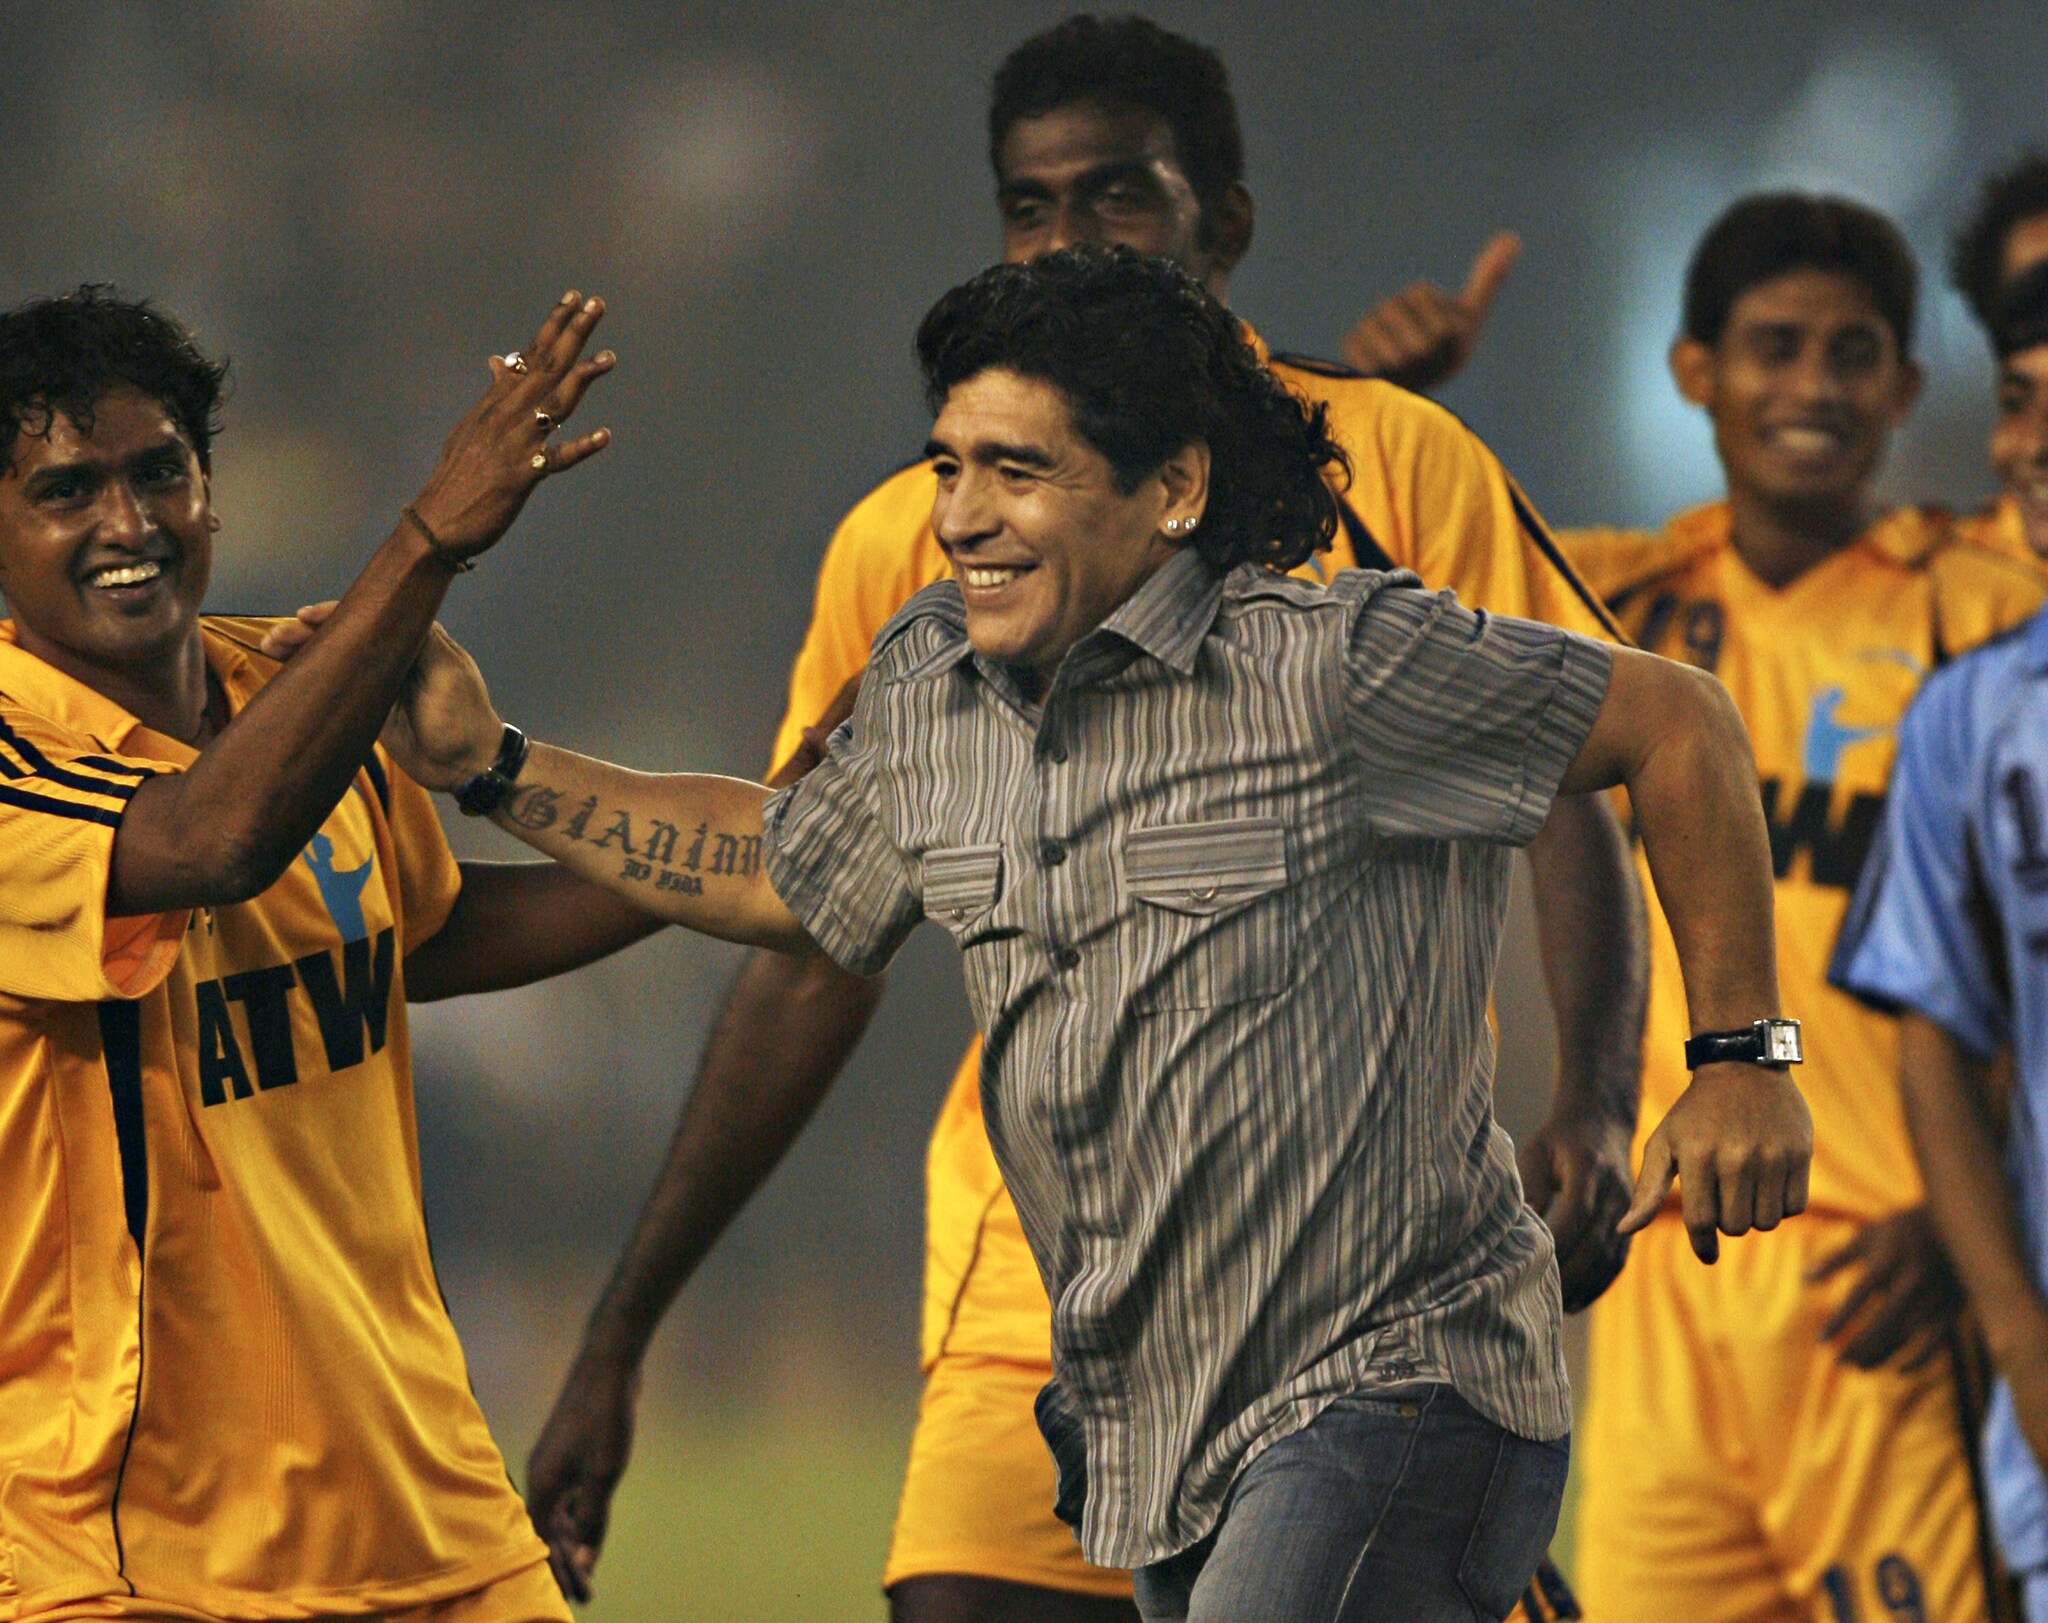  Argentina's national team coach and former football star Diego Armando Maradona (C) is greeted by Indian footballers during a felicitation programme at Salt Lake Stadium in Kolkata on December 6, 2008. Soccer superstar Diego Maradona said he was greatly touched by the frenzy over his brief visit here and promised to come back to India again in future. AFP PHOTO/Deshakalyan CHOWDHURY (Photo: AFP)